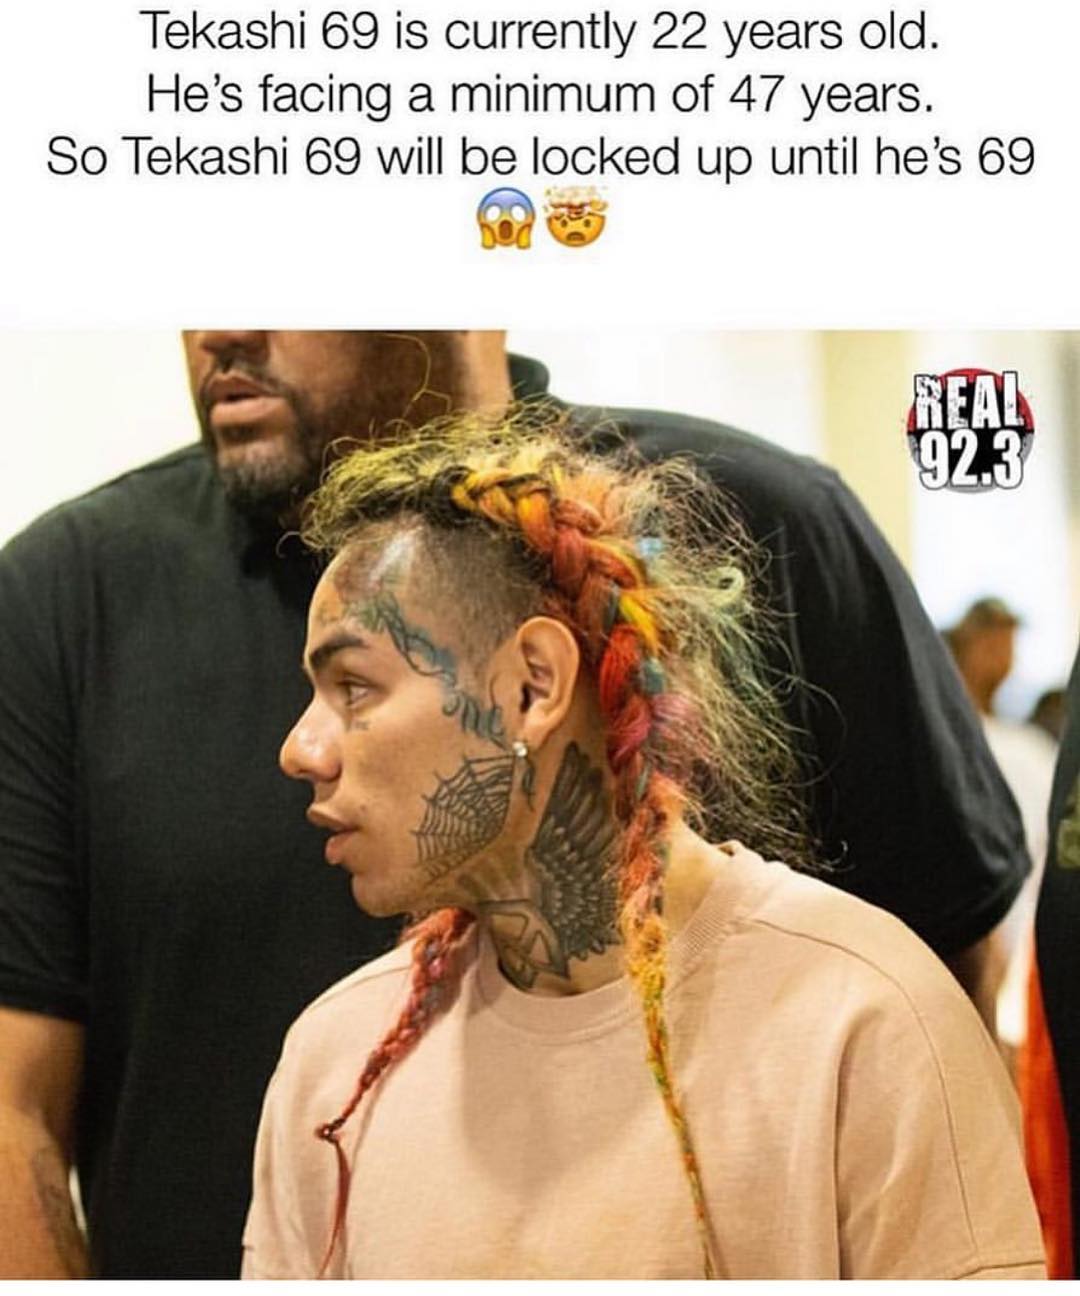 Tekashi 69 is currently 22 years old. He's facing a minimum of 47 years. So Tekashi 69 will be locked up until he's 69.